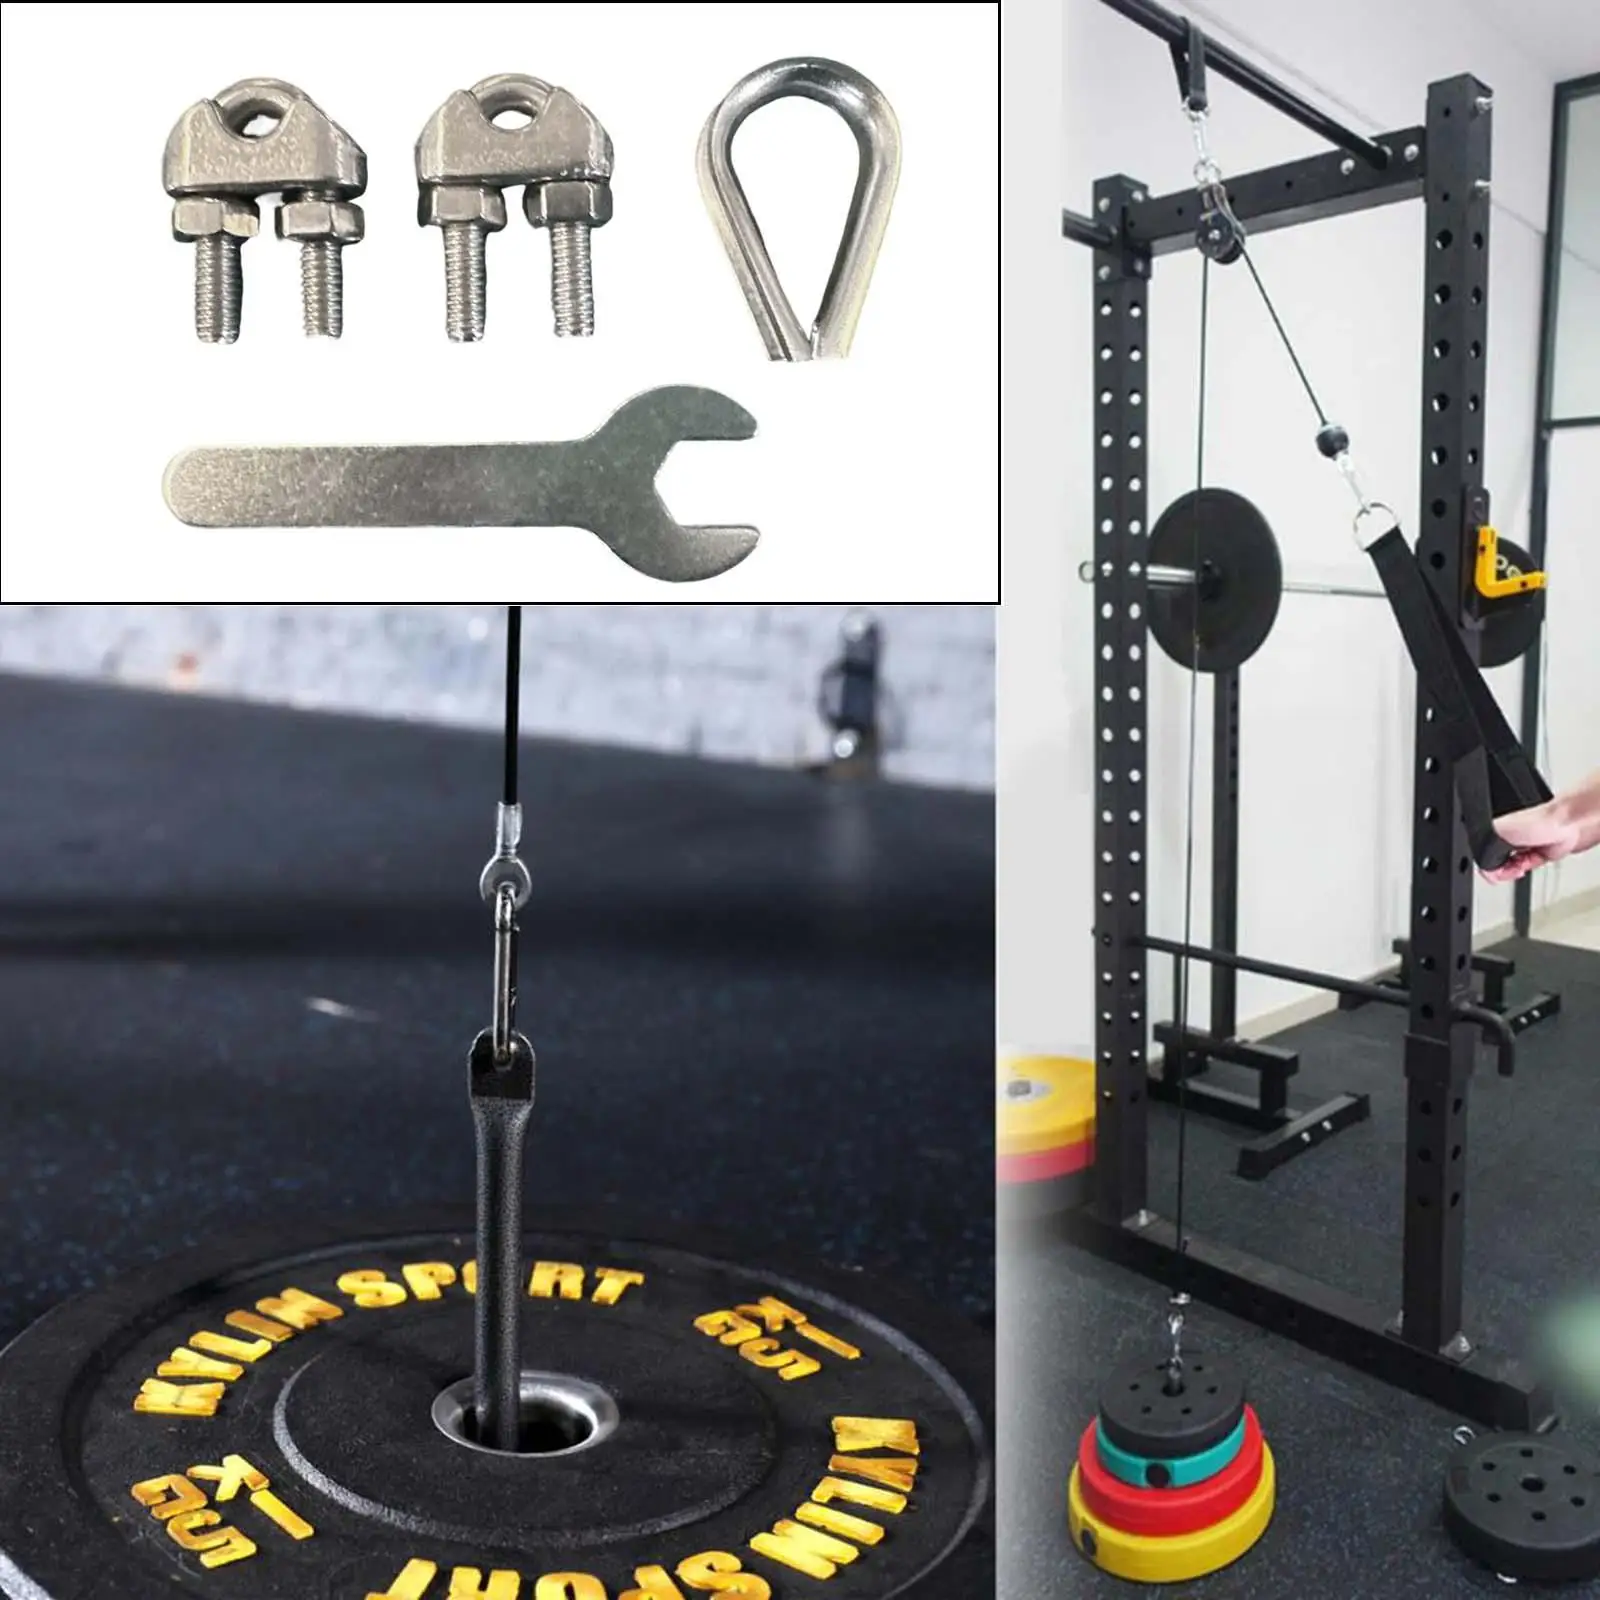 Rope Steel Wire Joints Gym Machine Cable Replacement Attachments for Fitness Pully Cable Machine